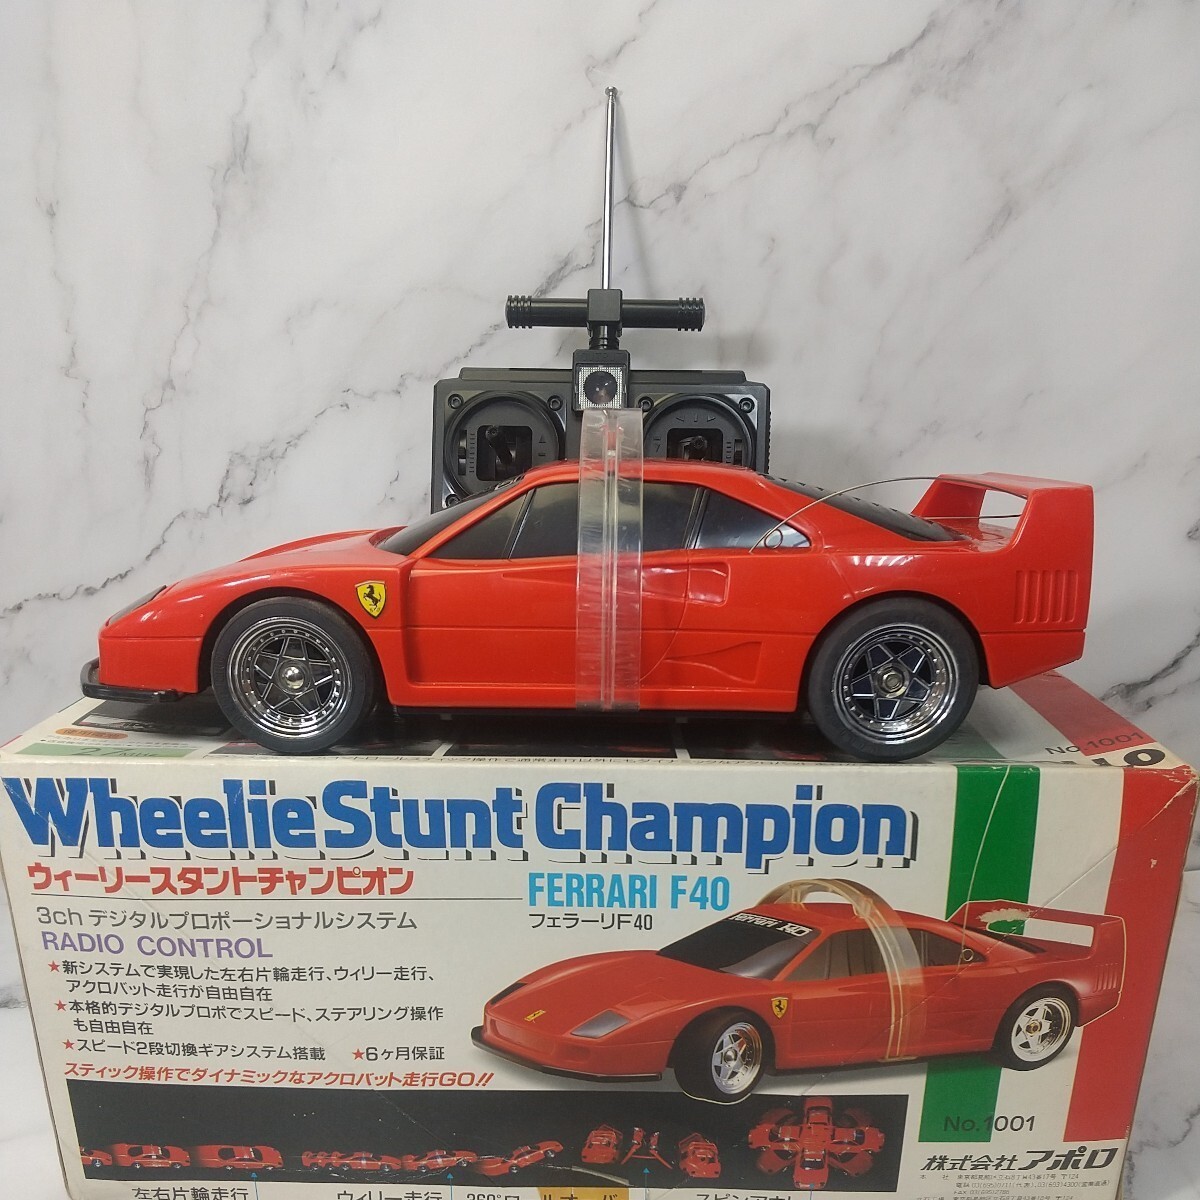 257 including in a package NG Apollo Apollo Willie Stunt Champion Acroba to Ferrari F40 1/14 scale radio-controller car body transmitter manual box attaching ultra rare 